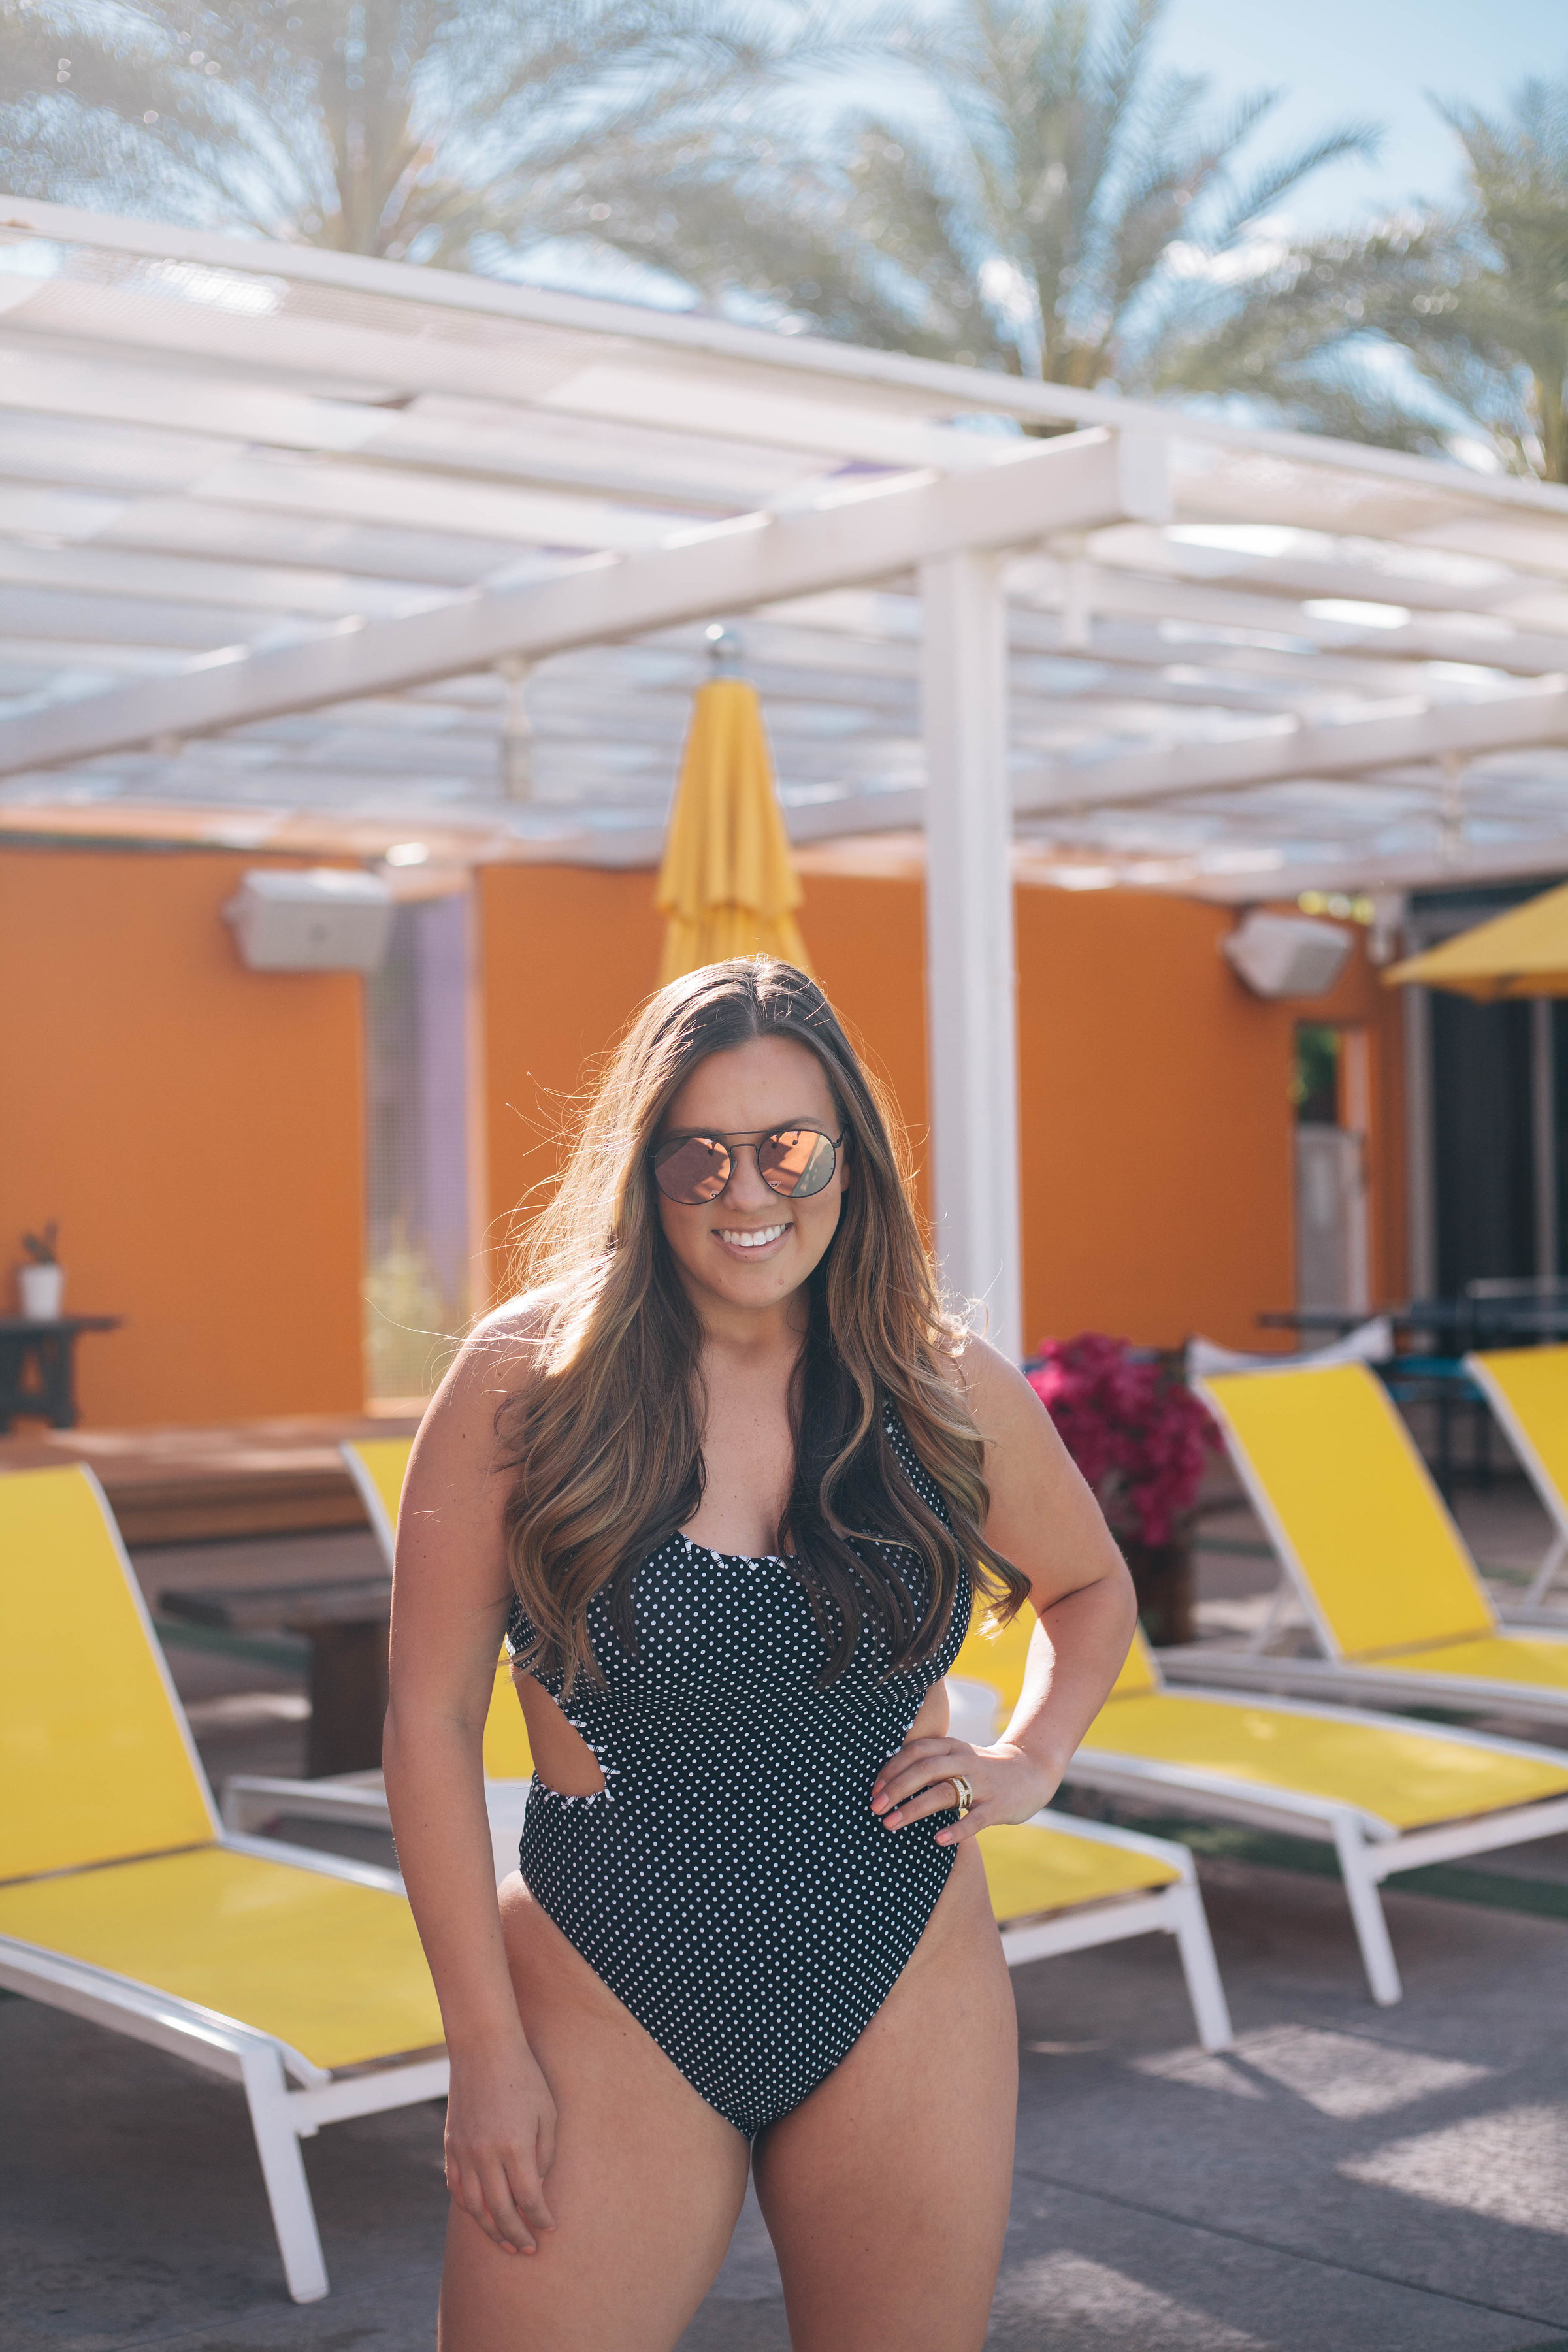 Ashley Zeal from Two Peas in a Prada shares the Becca Swim Be You initiative and talks about body image and how social media can influence society's ideals. 